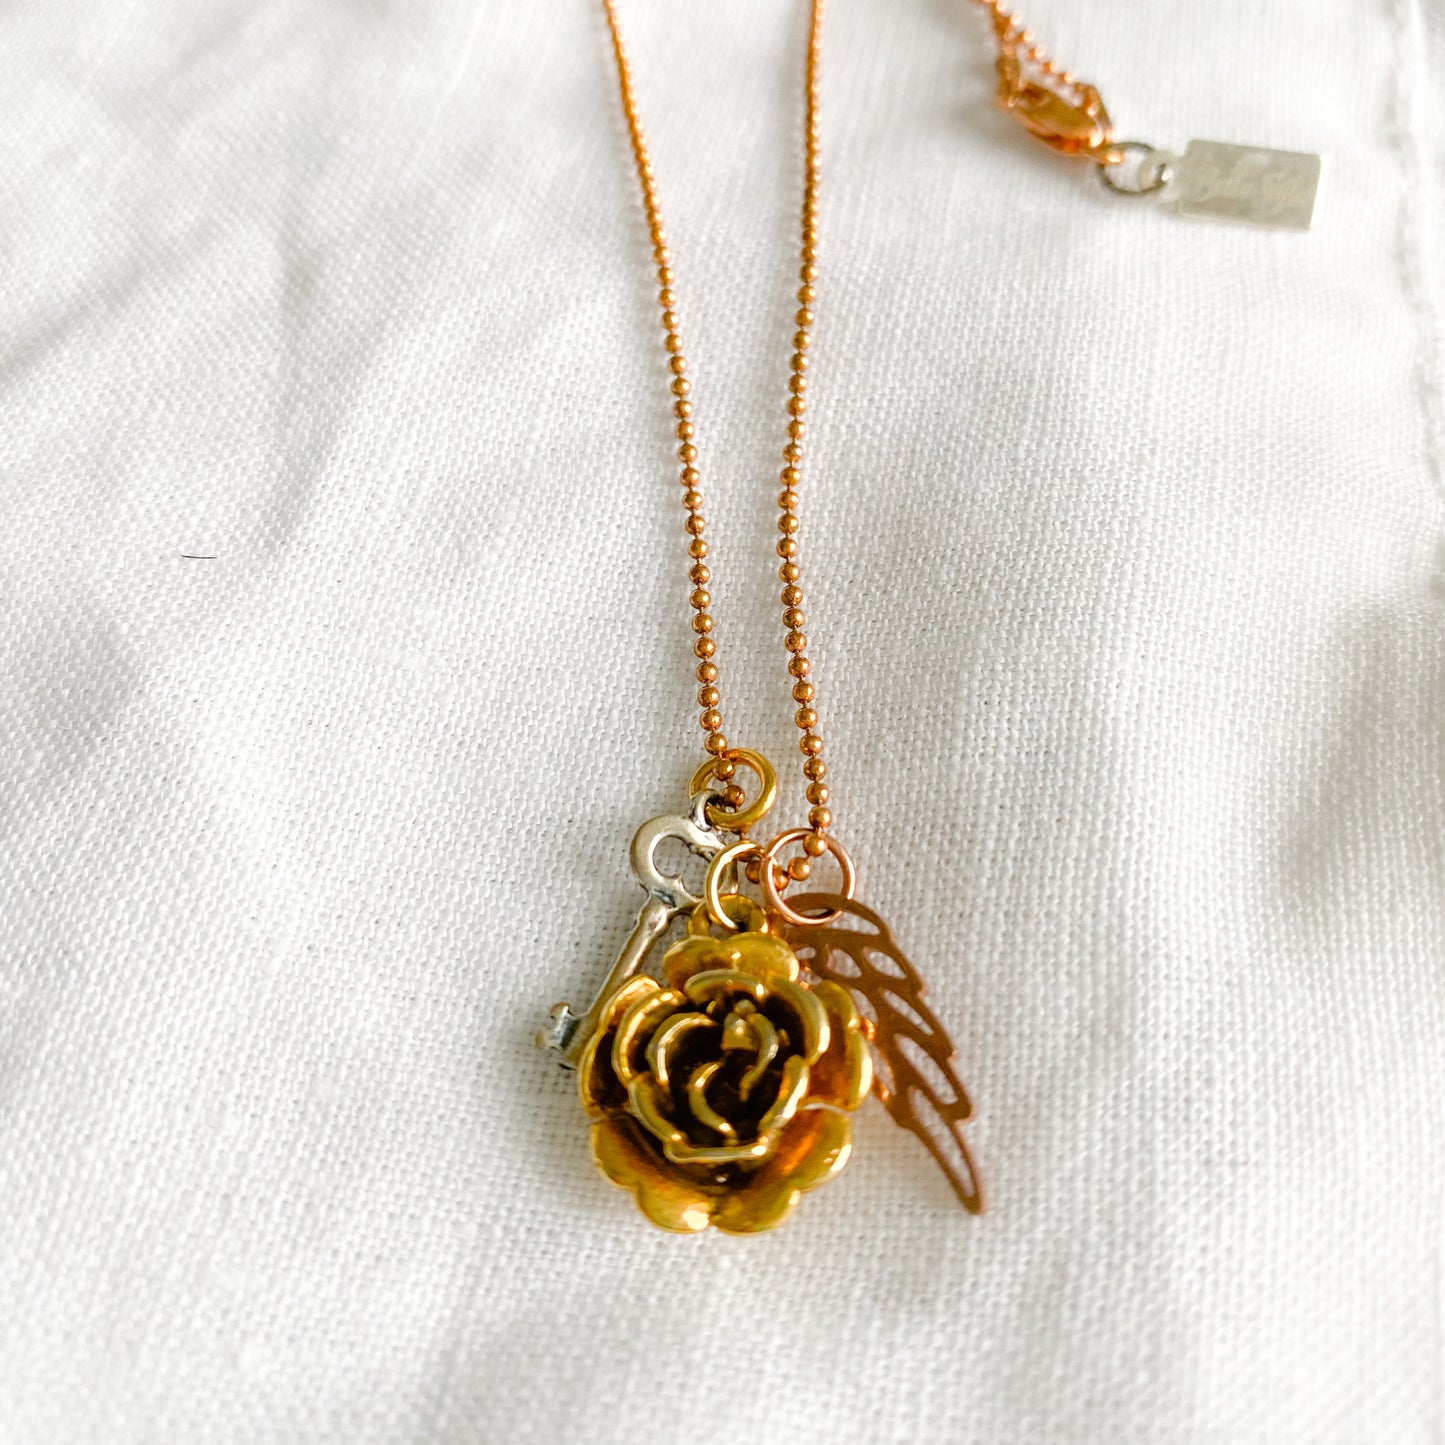 Rose Charm Necklace - BelleStyle